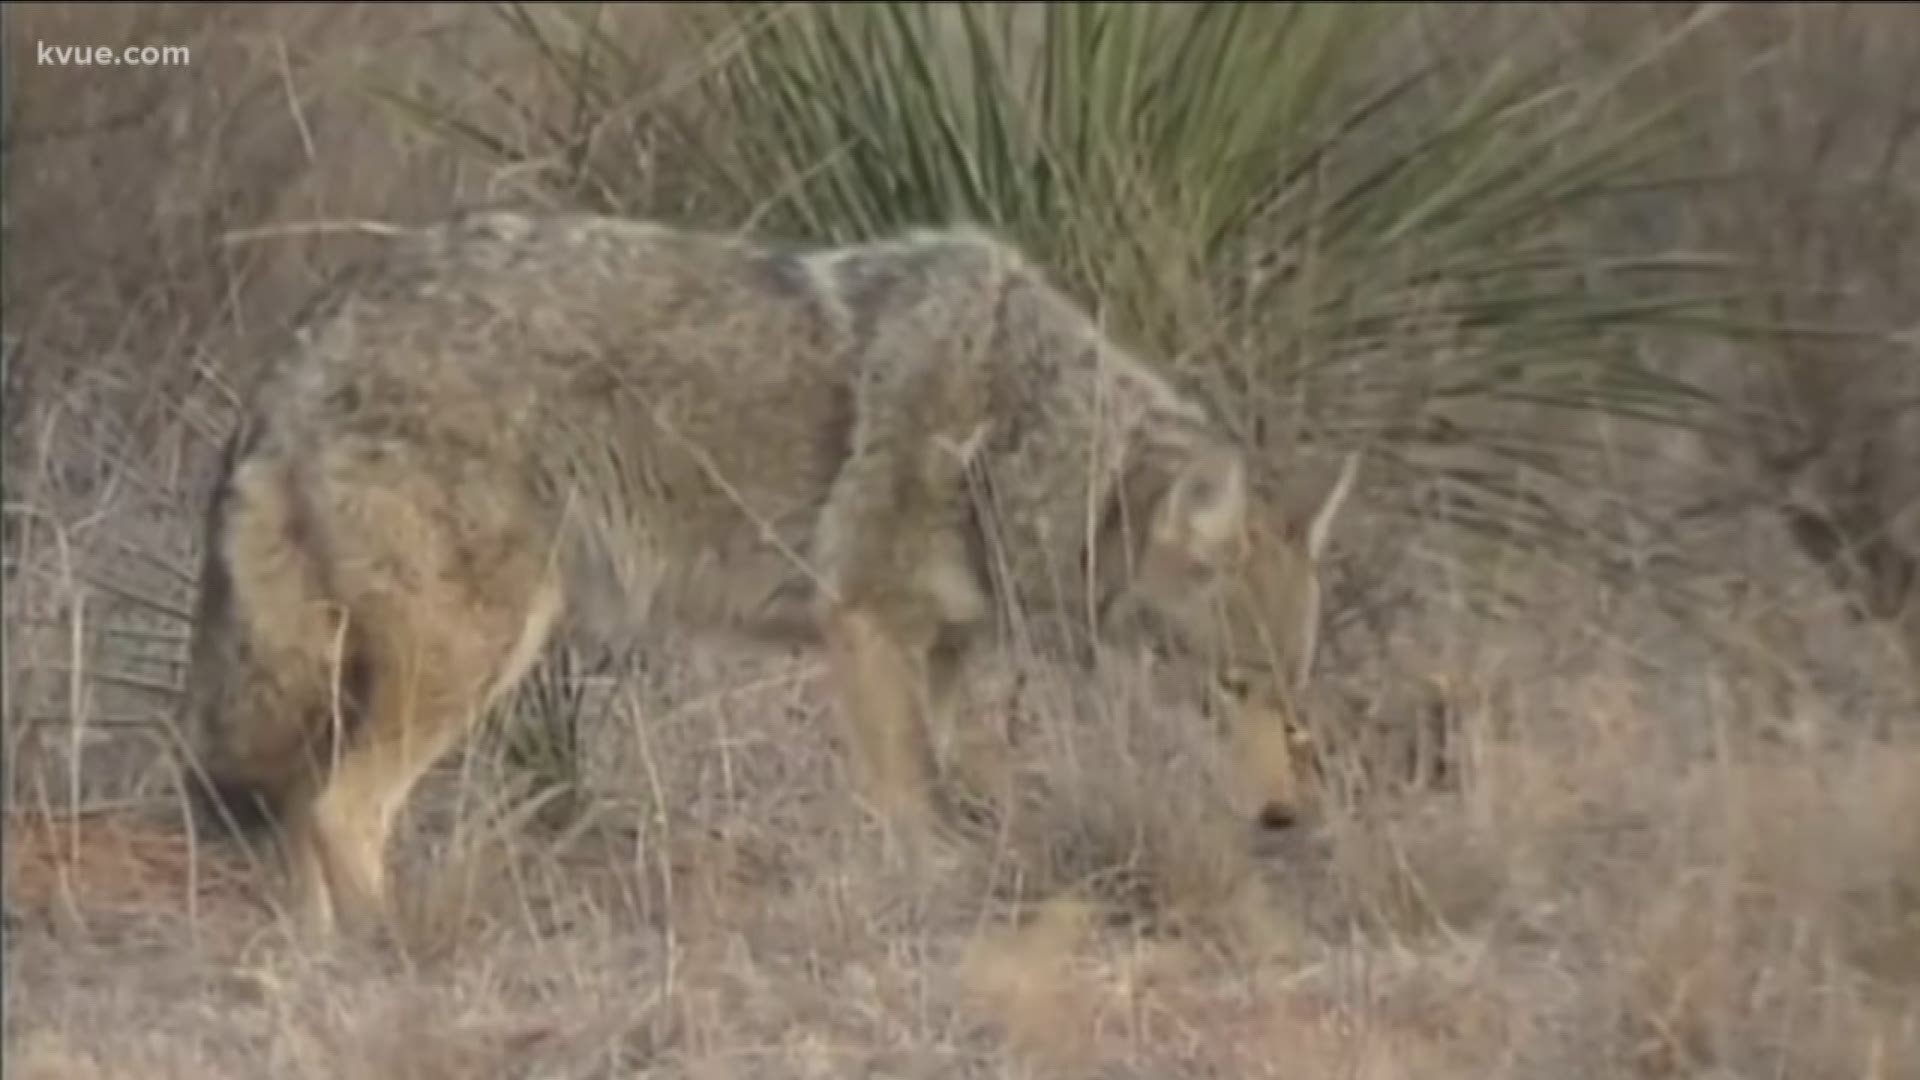 You don't have to be in the wilderness to find a coyote.